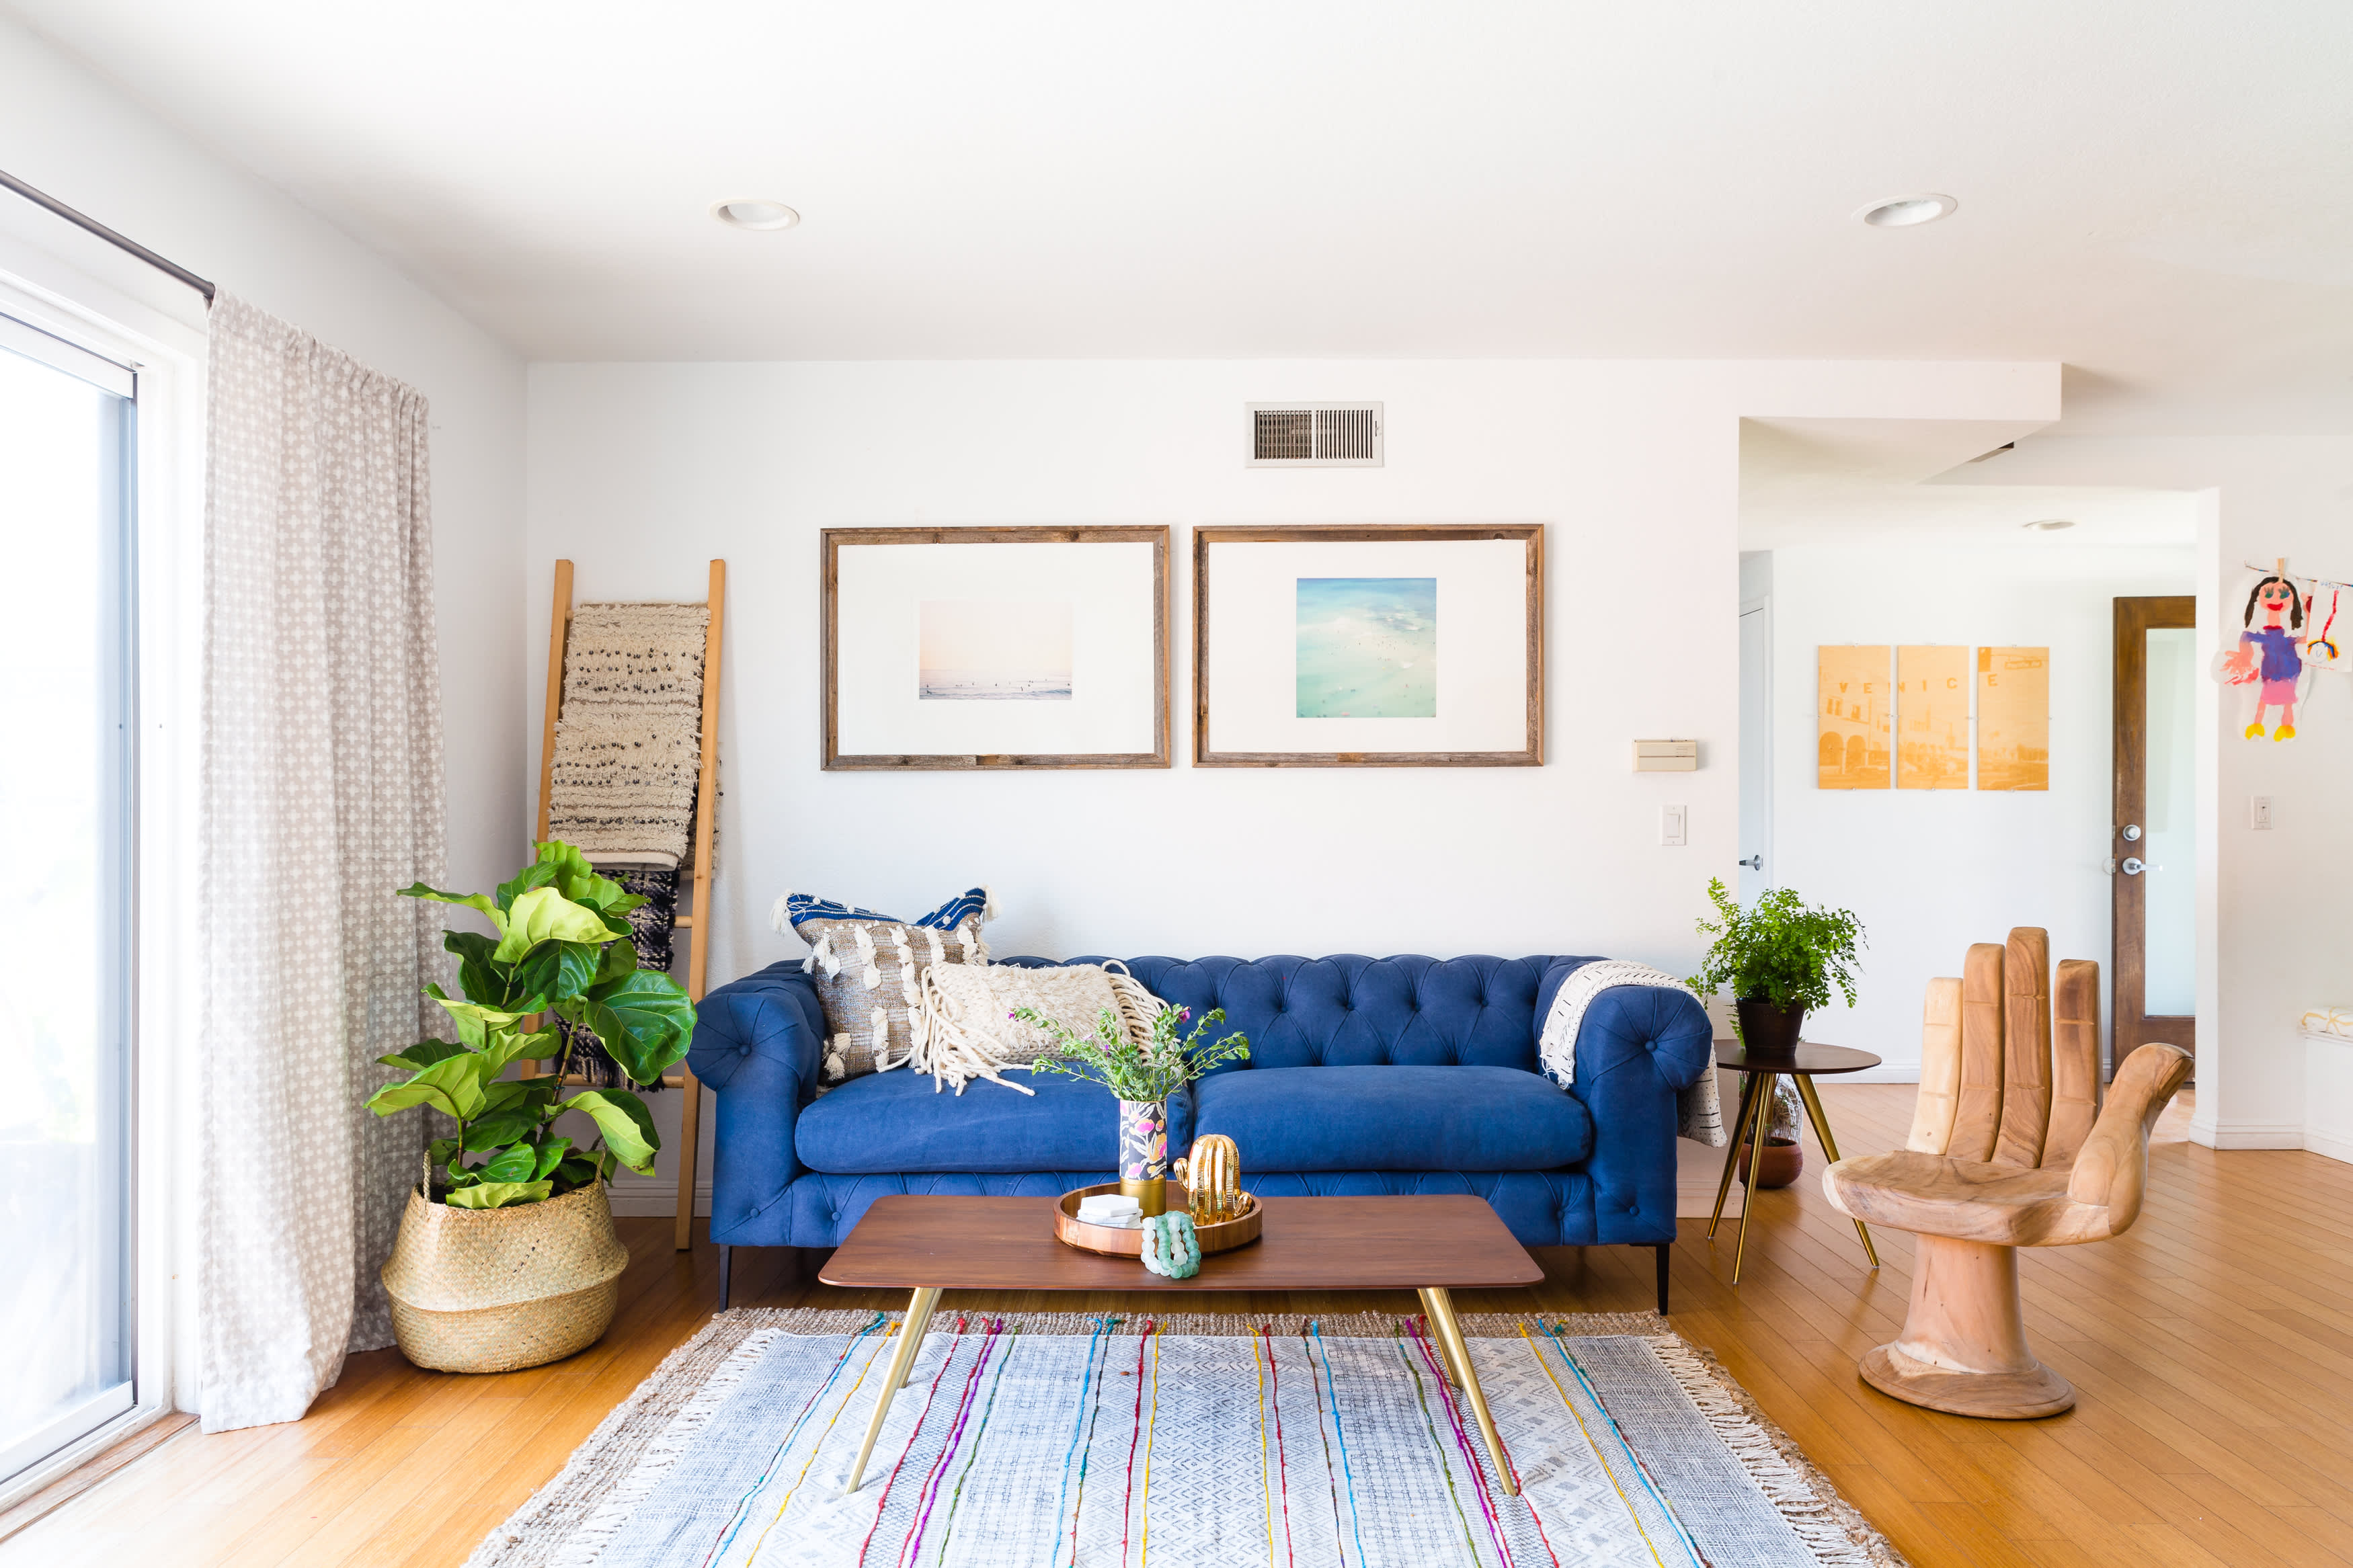 span let down Corresponding to 15 Places to Find Cheap Boho Furniture Decor | Apartment Therapy